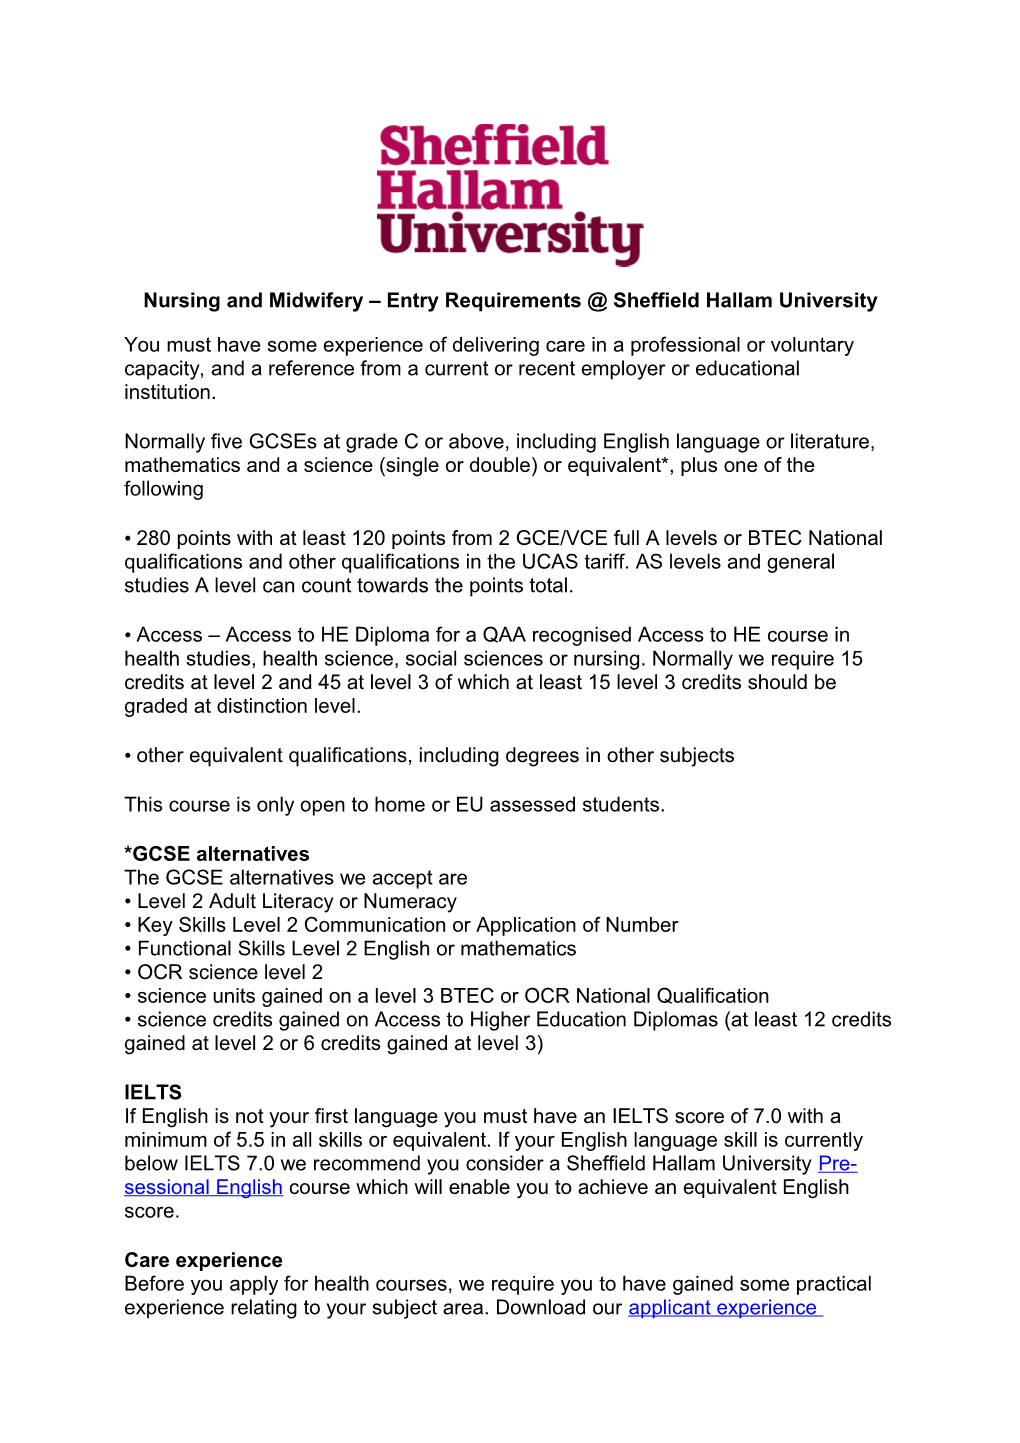 Nursing and Midwifery Entry Requirements Sheffield Hallam University